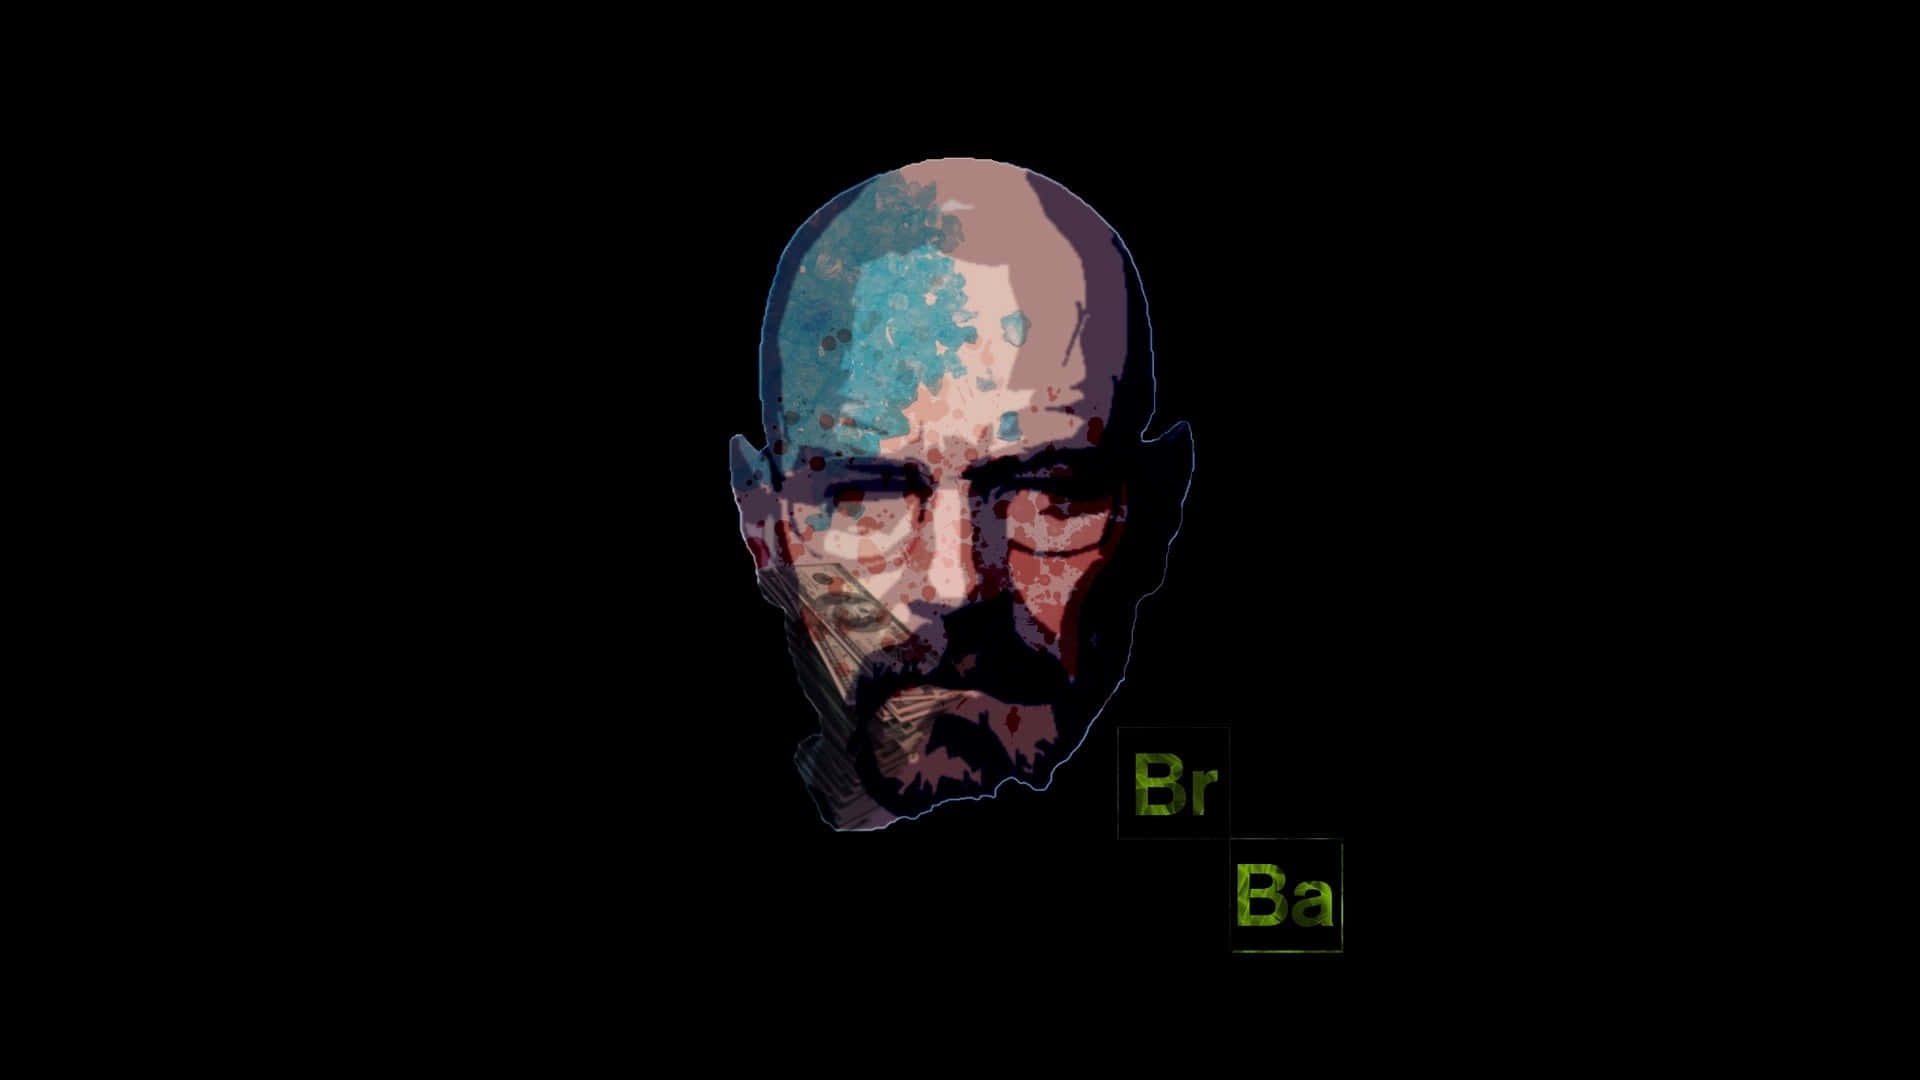 "Breaking Bad; The Definitive TV Series"